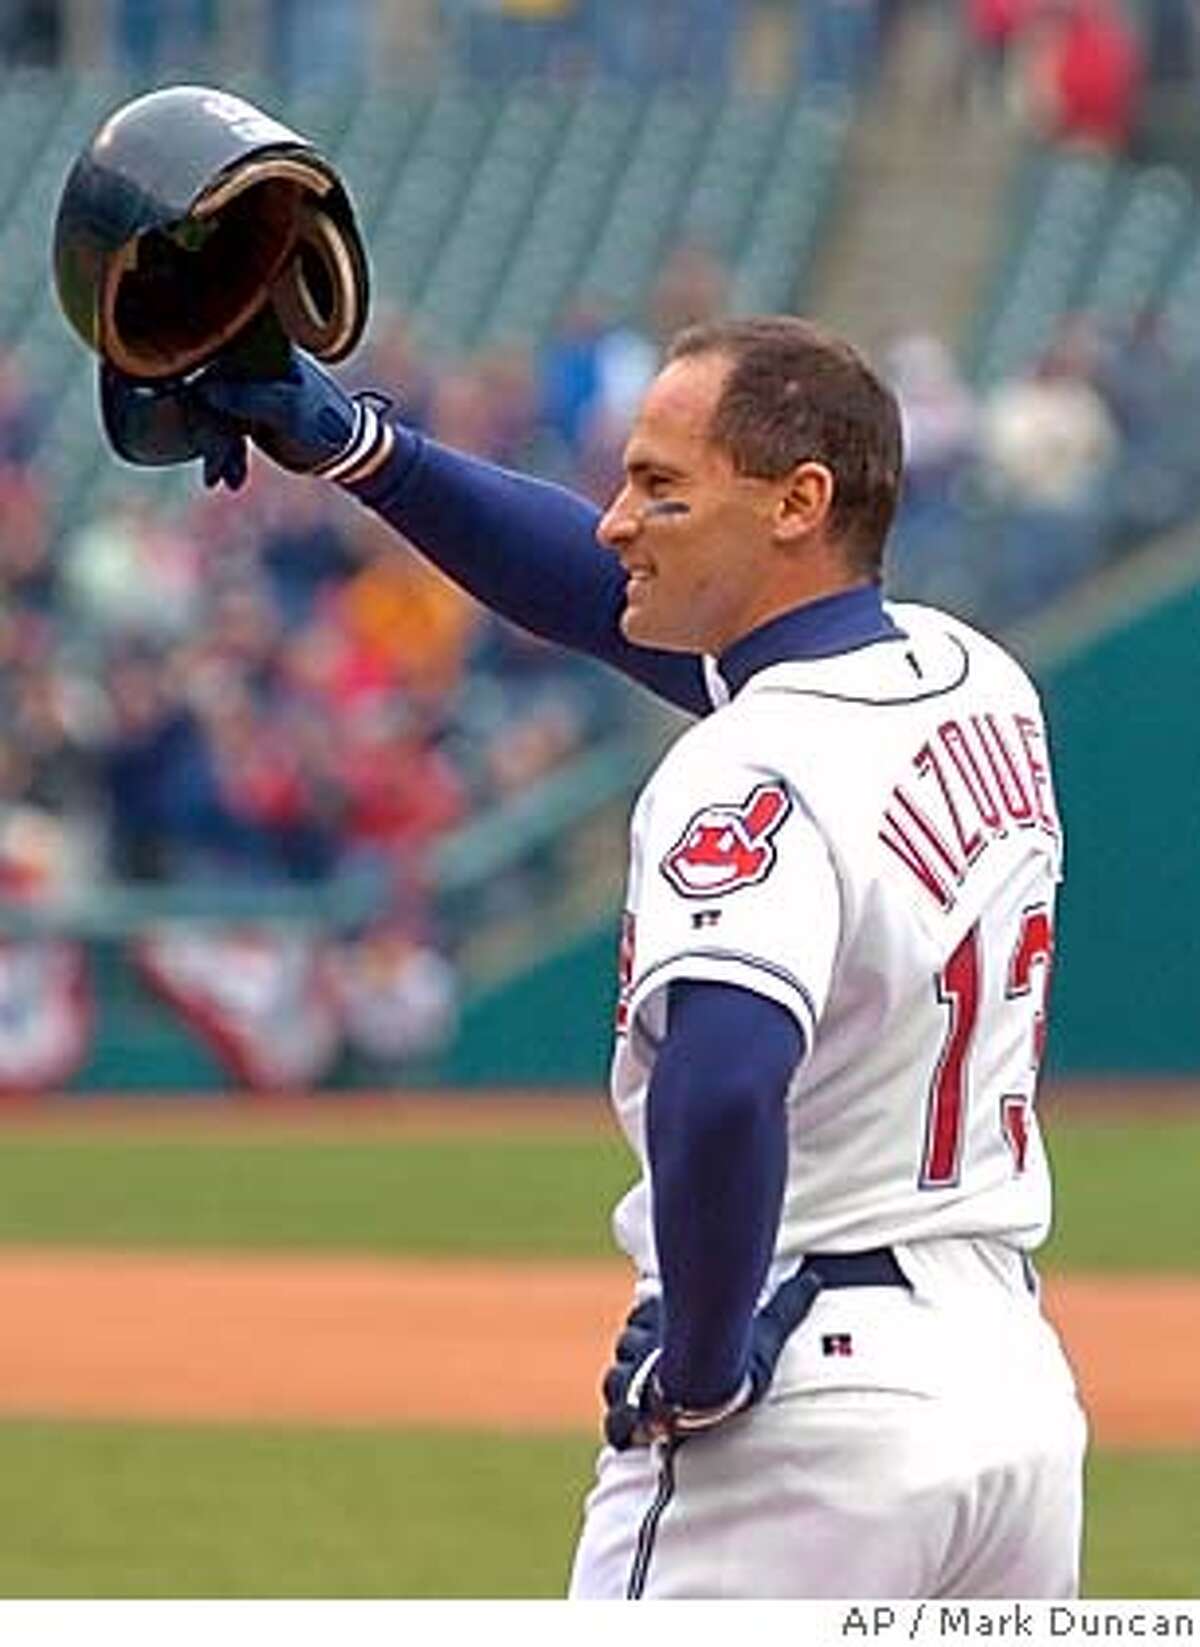 Cleveland Indians' Omar Vizquel waves to the crowd after collecting his 2,000th career hit Thursday, April 22, 2004, in Cleveland. Vizquel singled in the eighth inning off Kansas City Royals reliever Jason Grimsley in the Indians' 5-4 win. (AP Photo/Mark Duncan) Ran on: 09-05-2004 ALSO RAN 9/5/2004 Sports#Sports#Chronicle#11/15/2004#ALL#5star##0421729321